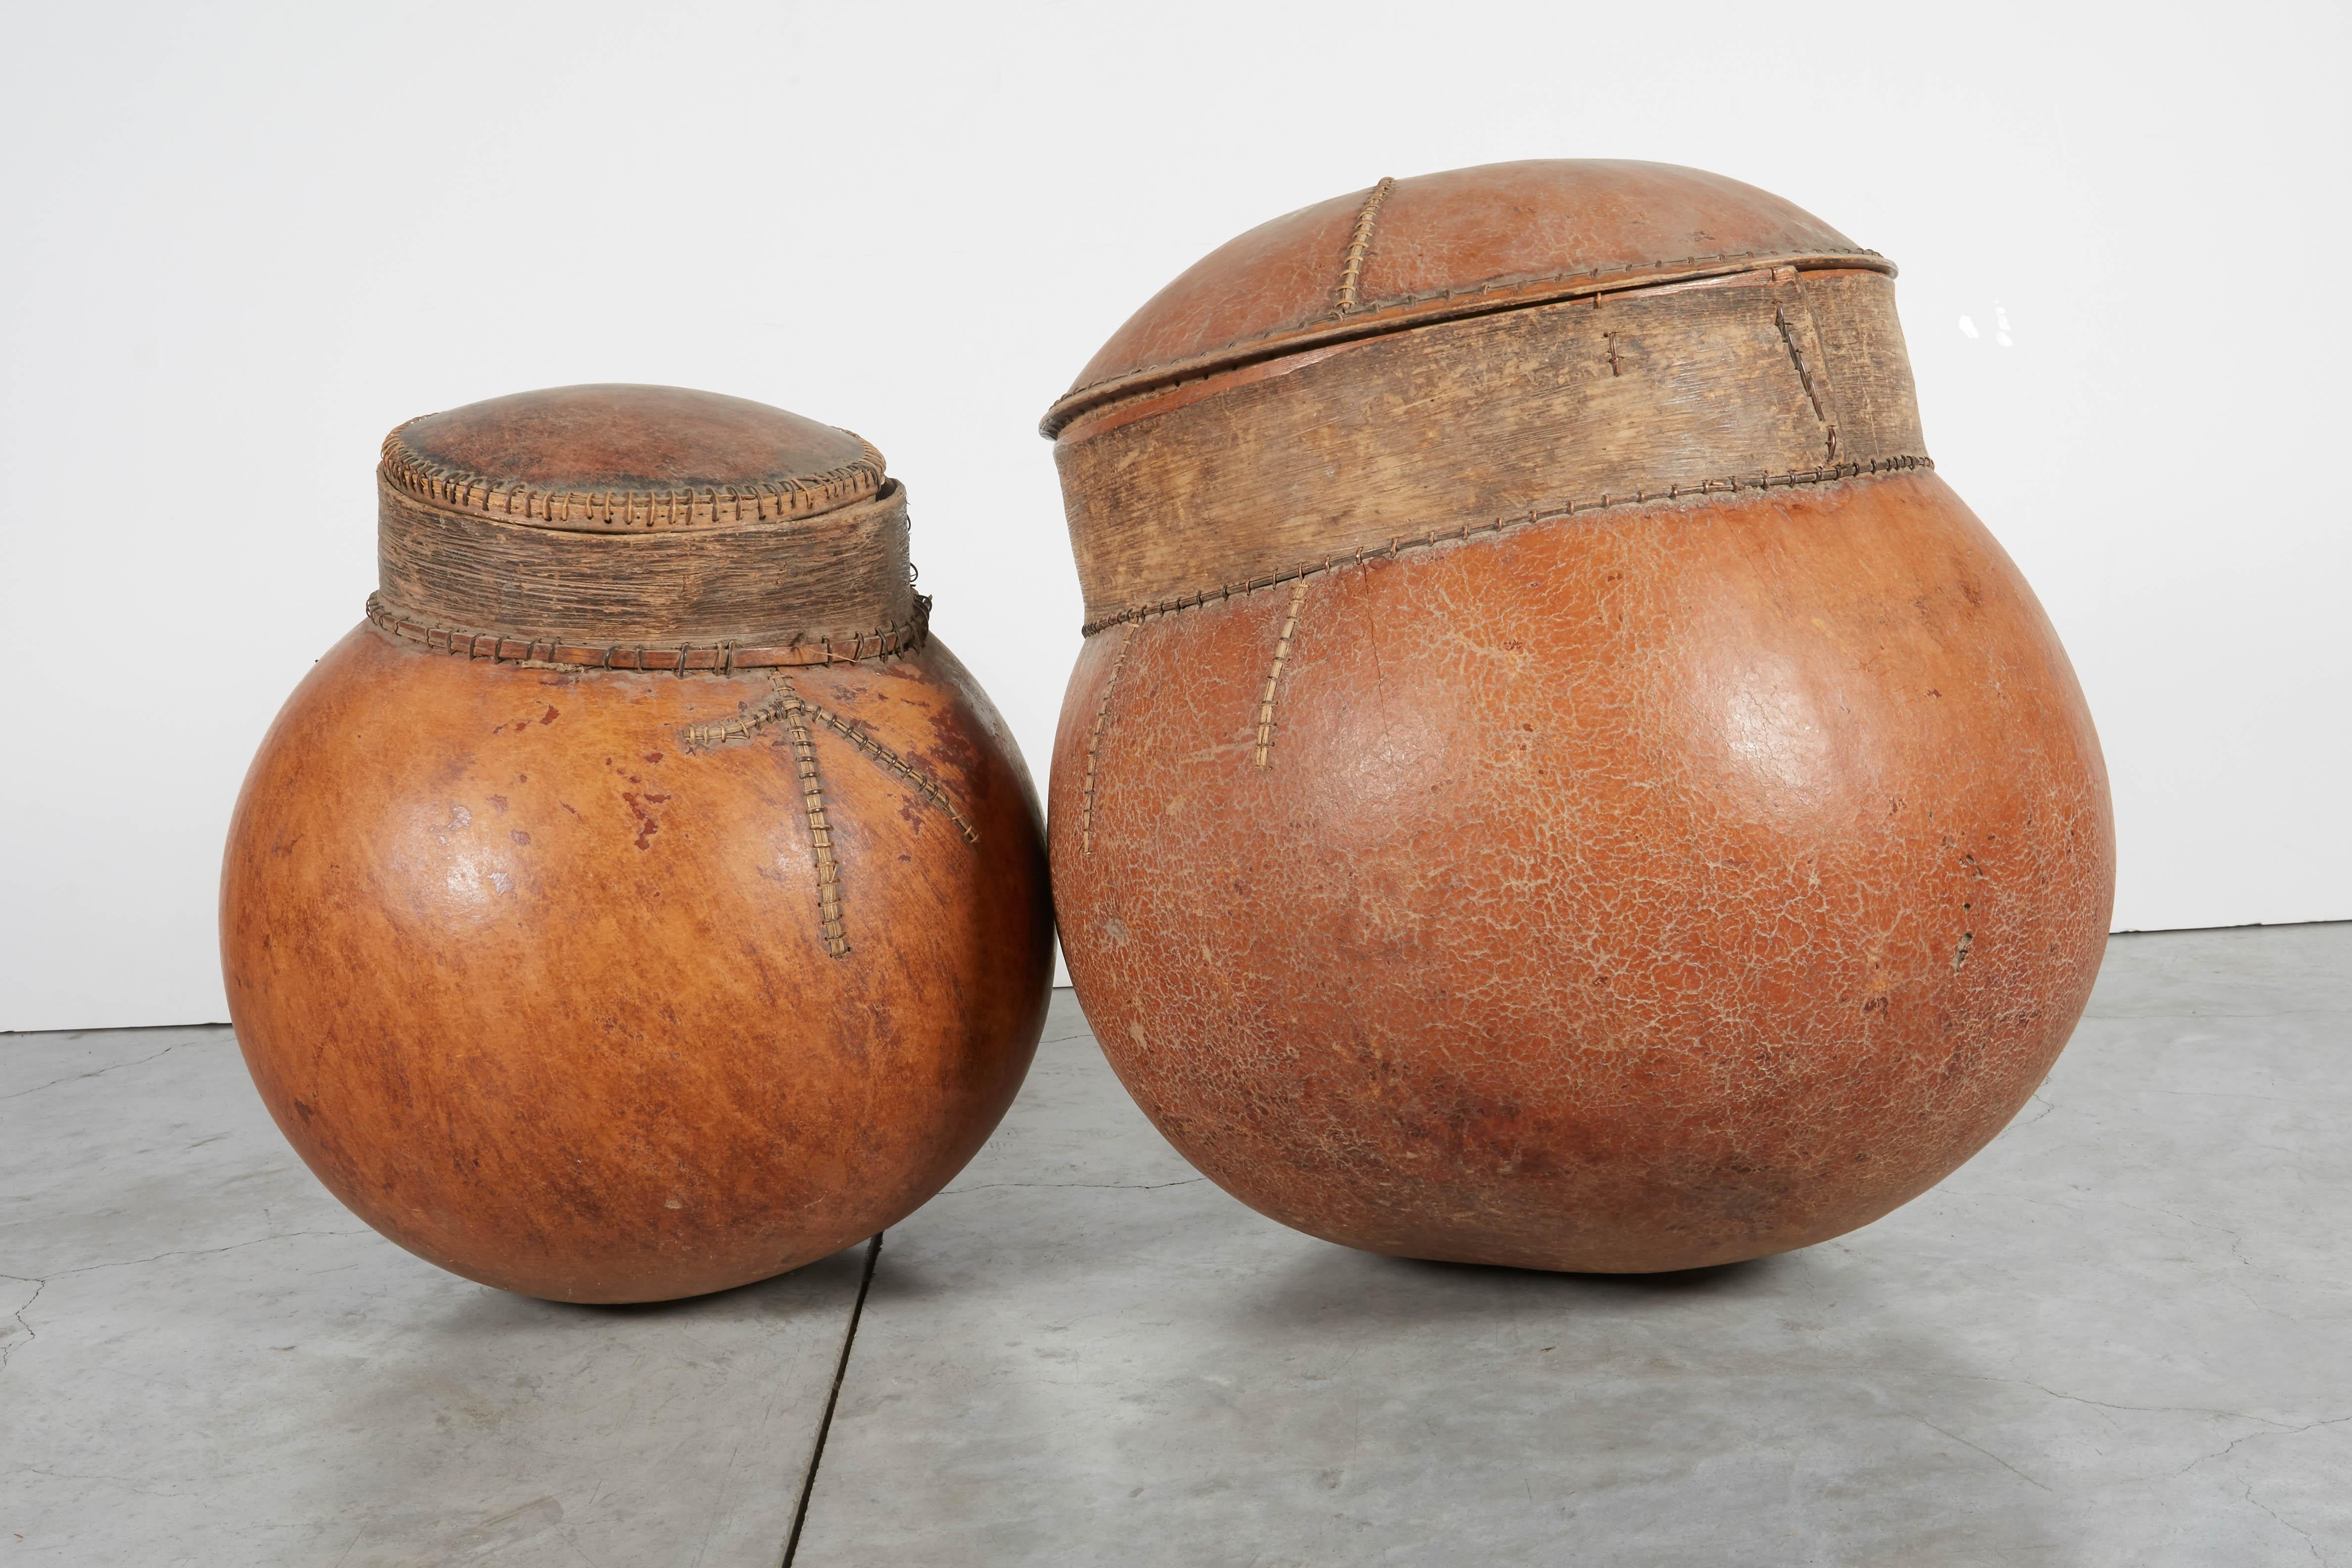 Two beautifully weathered African gourd storage vessels with fitted covers and old stitched repairs. Wonderful objects and great conversation pieces.
Sold individually.
Dimensions:
Large: Diameter 16 height 17; small: Diameter 15 height 15.